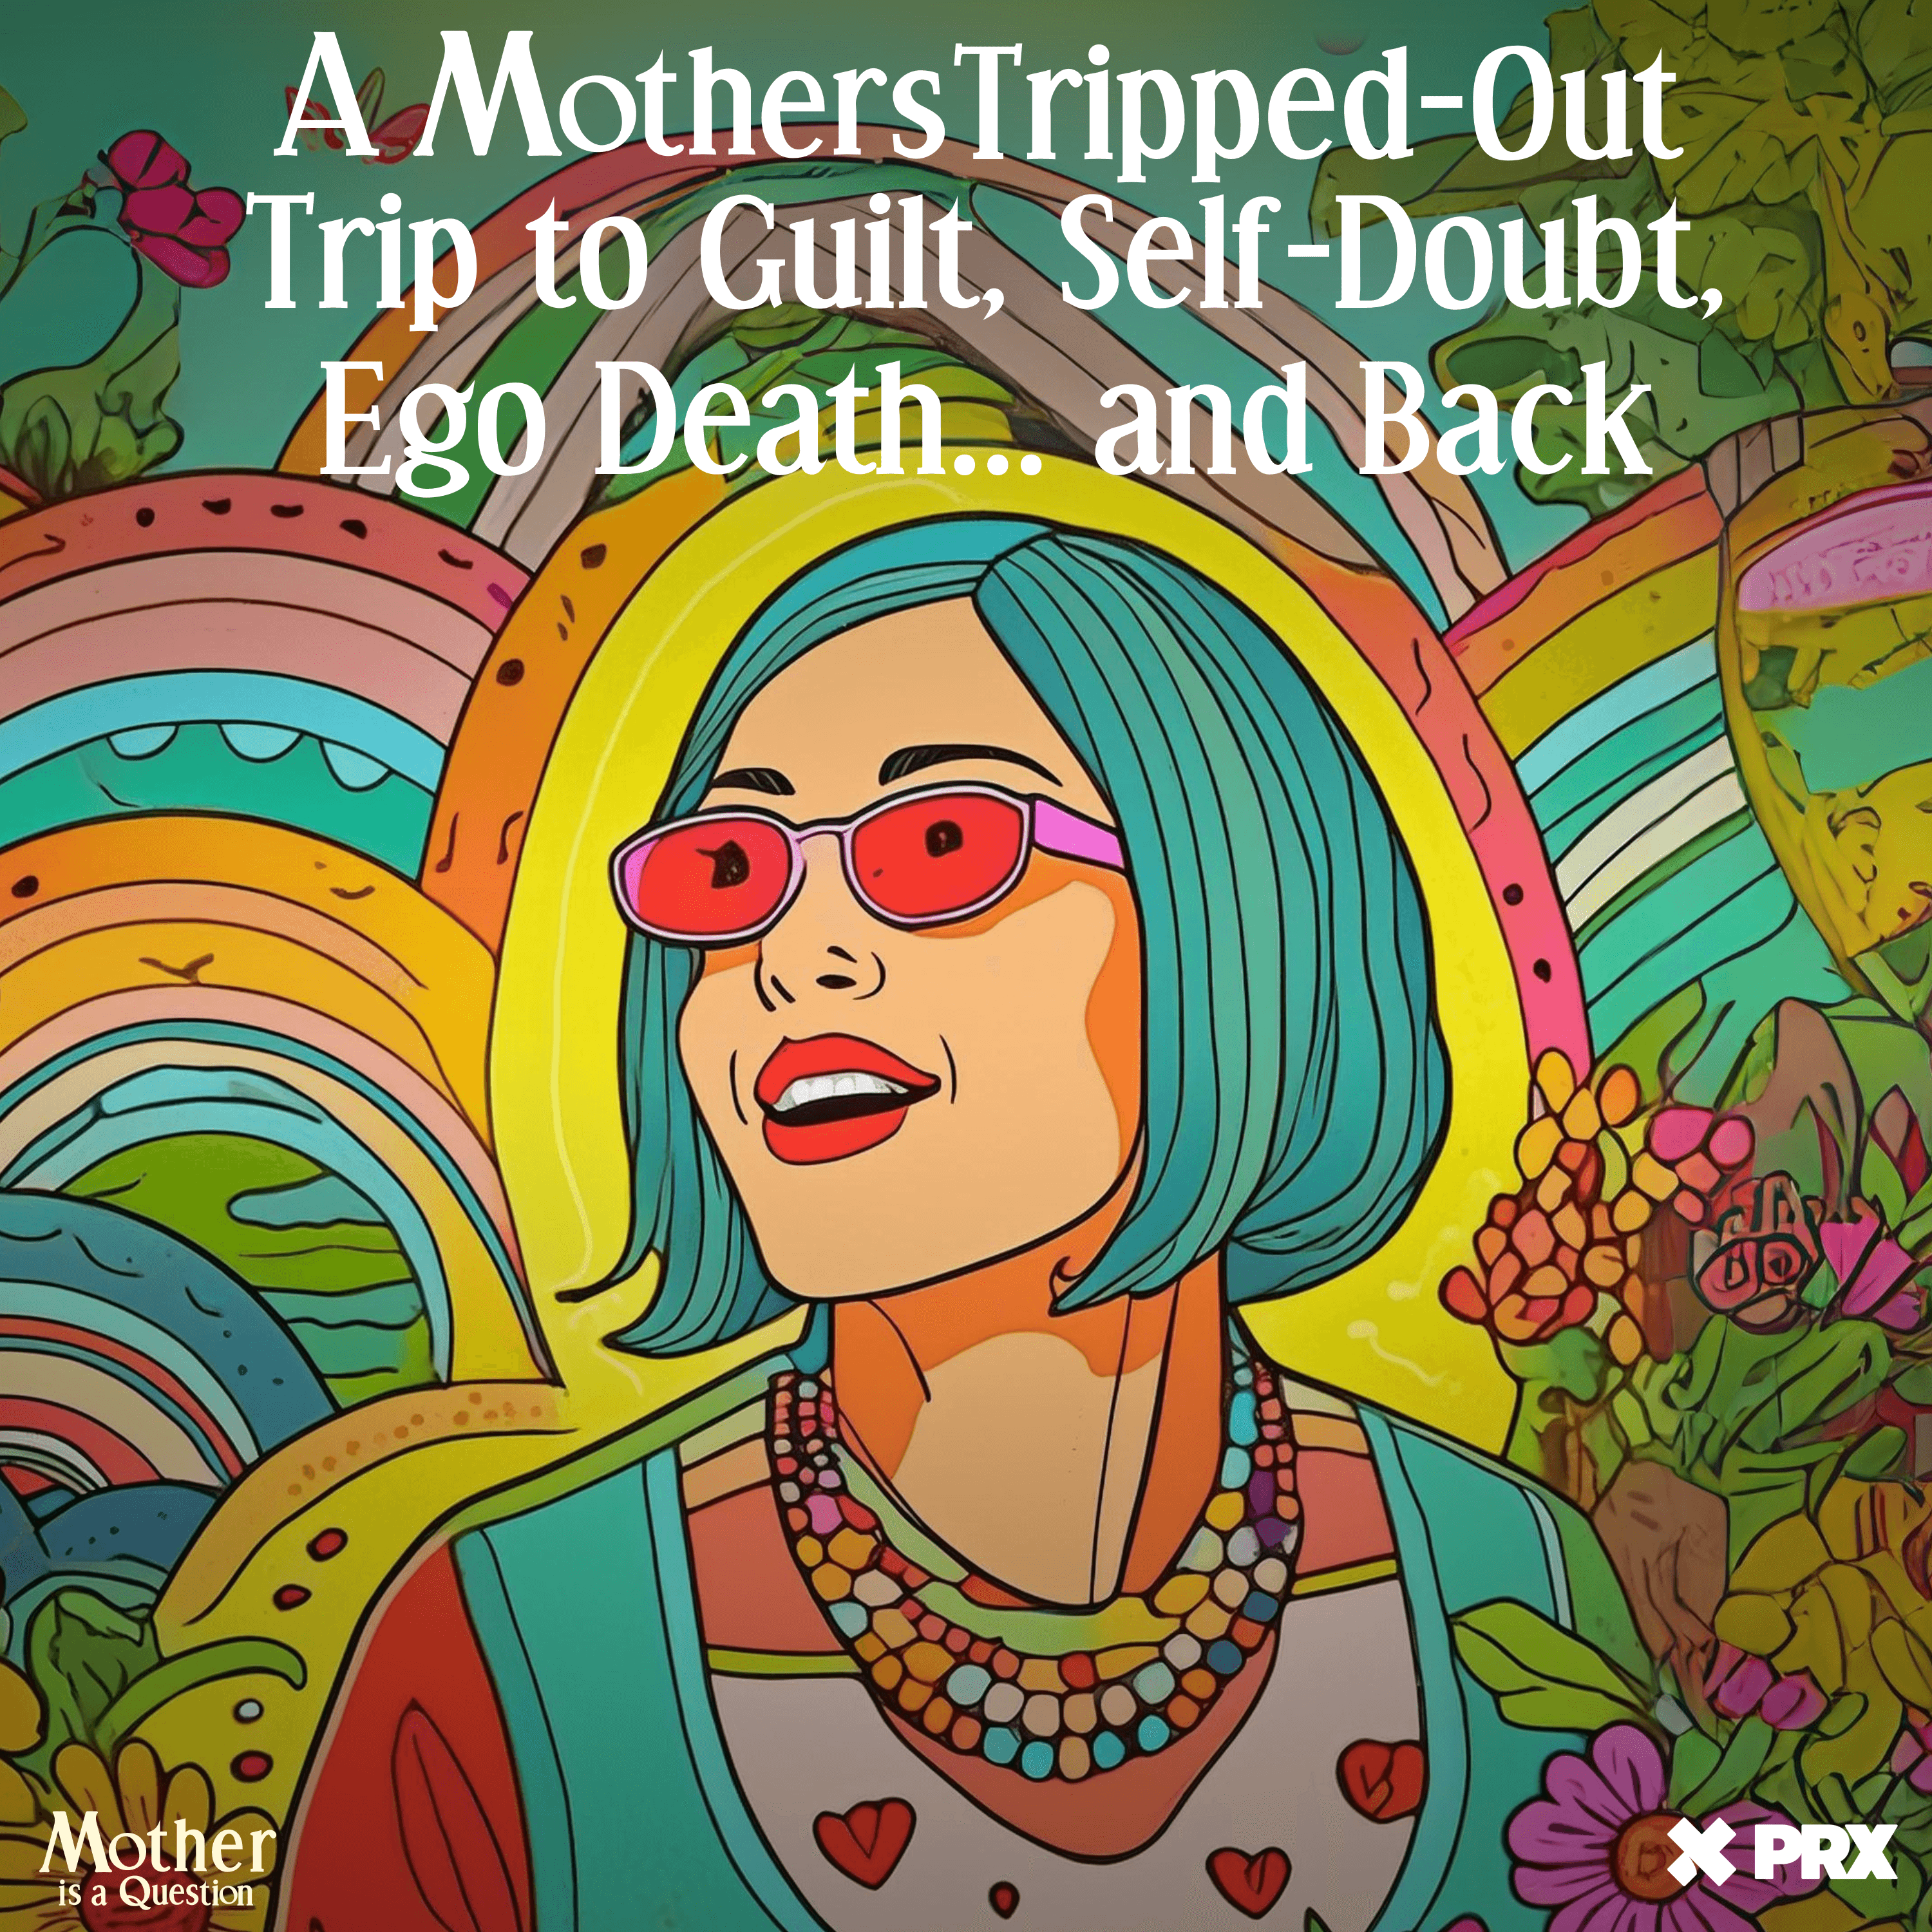 Thumbnail for "A Mother’s Tripped-Out Trip to Guilt, Self-Doubt, Ego Death… and Back (Negin Farsad)".